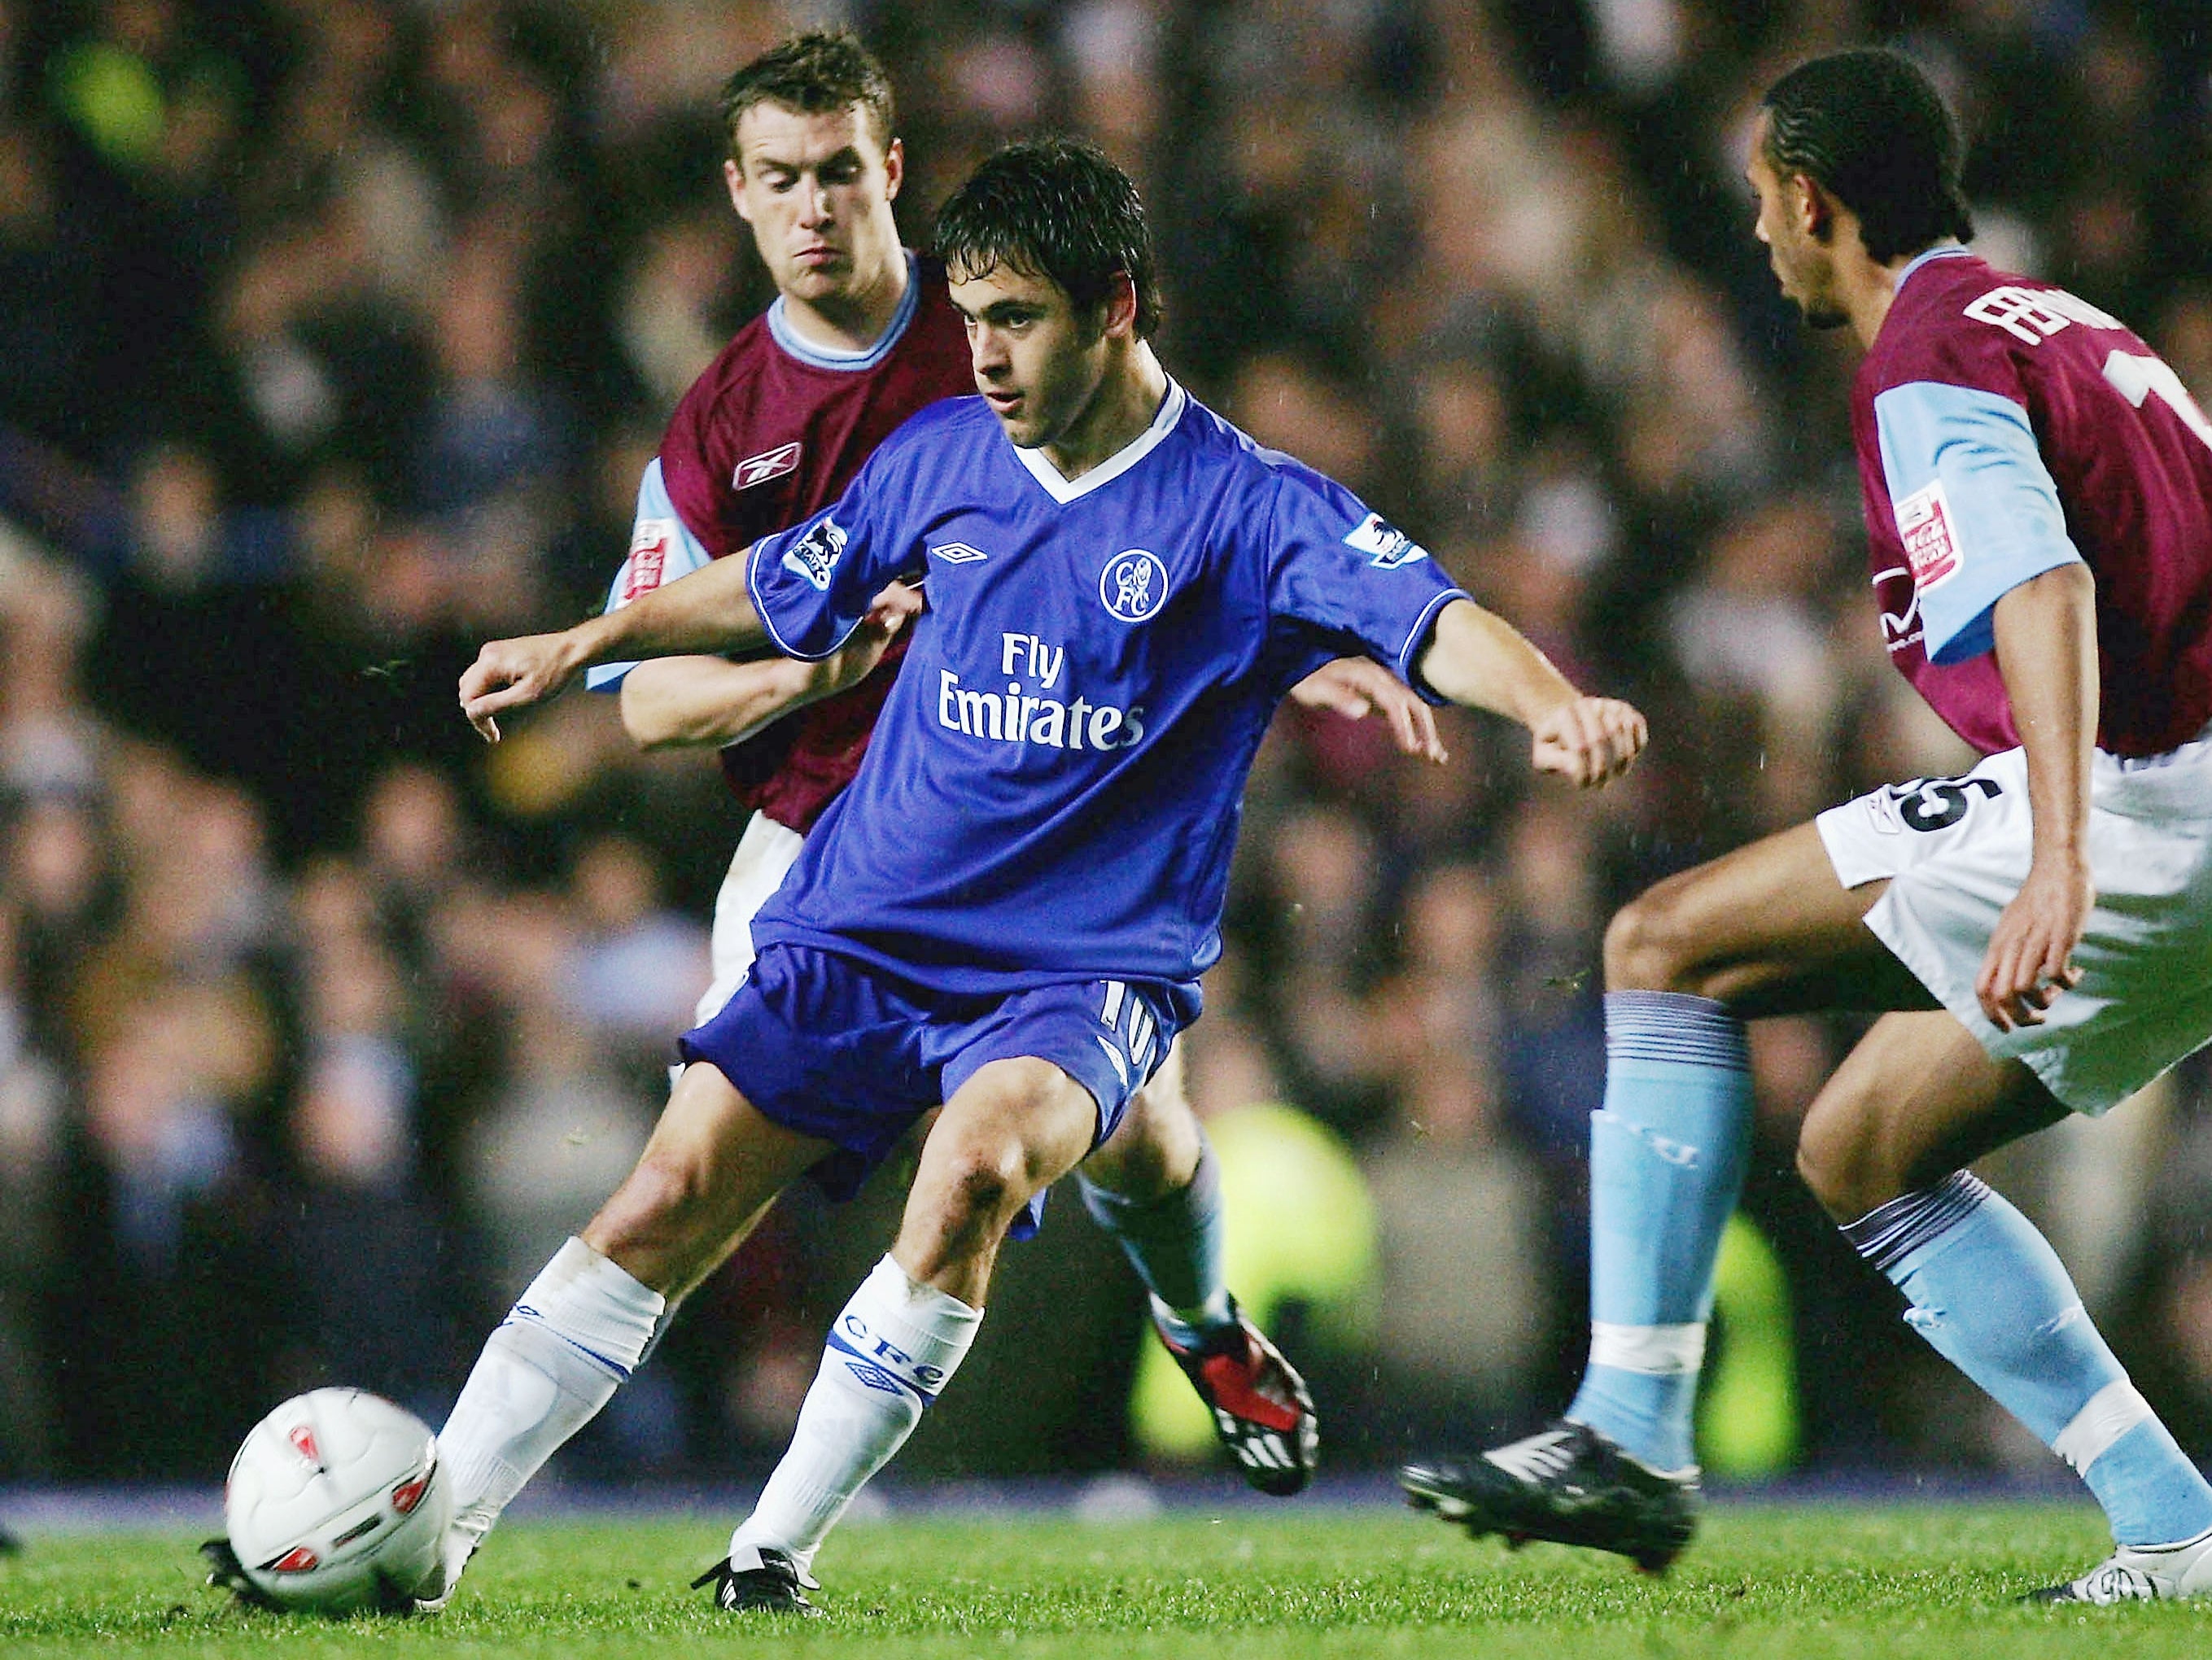 Joe Cole talks about rebuffing Tottenham for Liverpool after his Chelsea spell. 